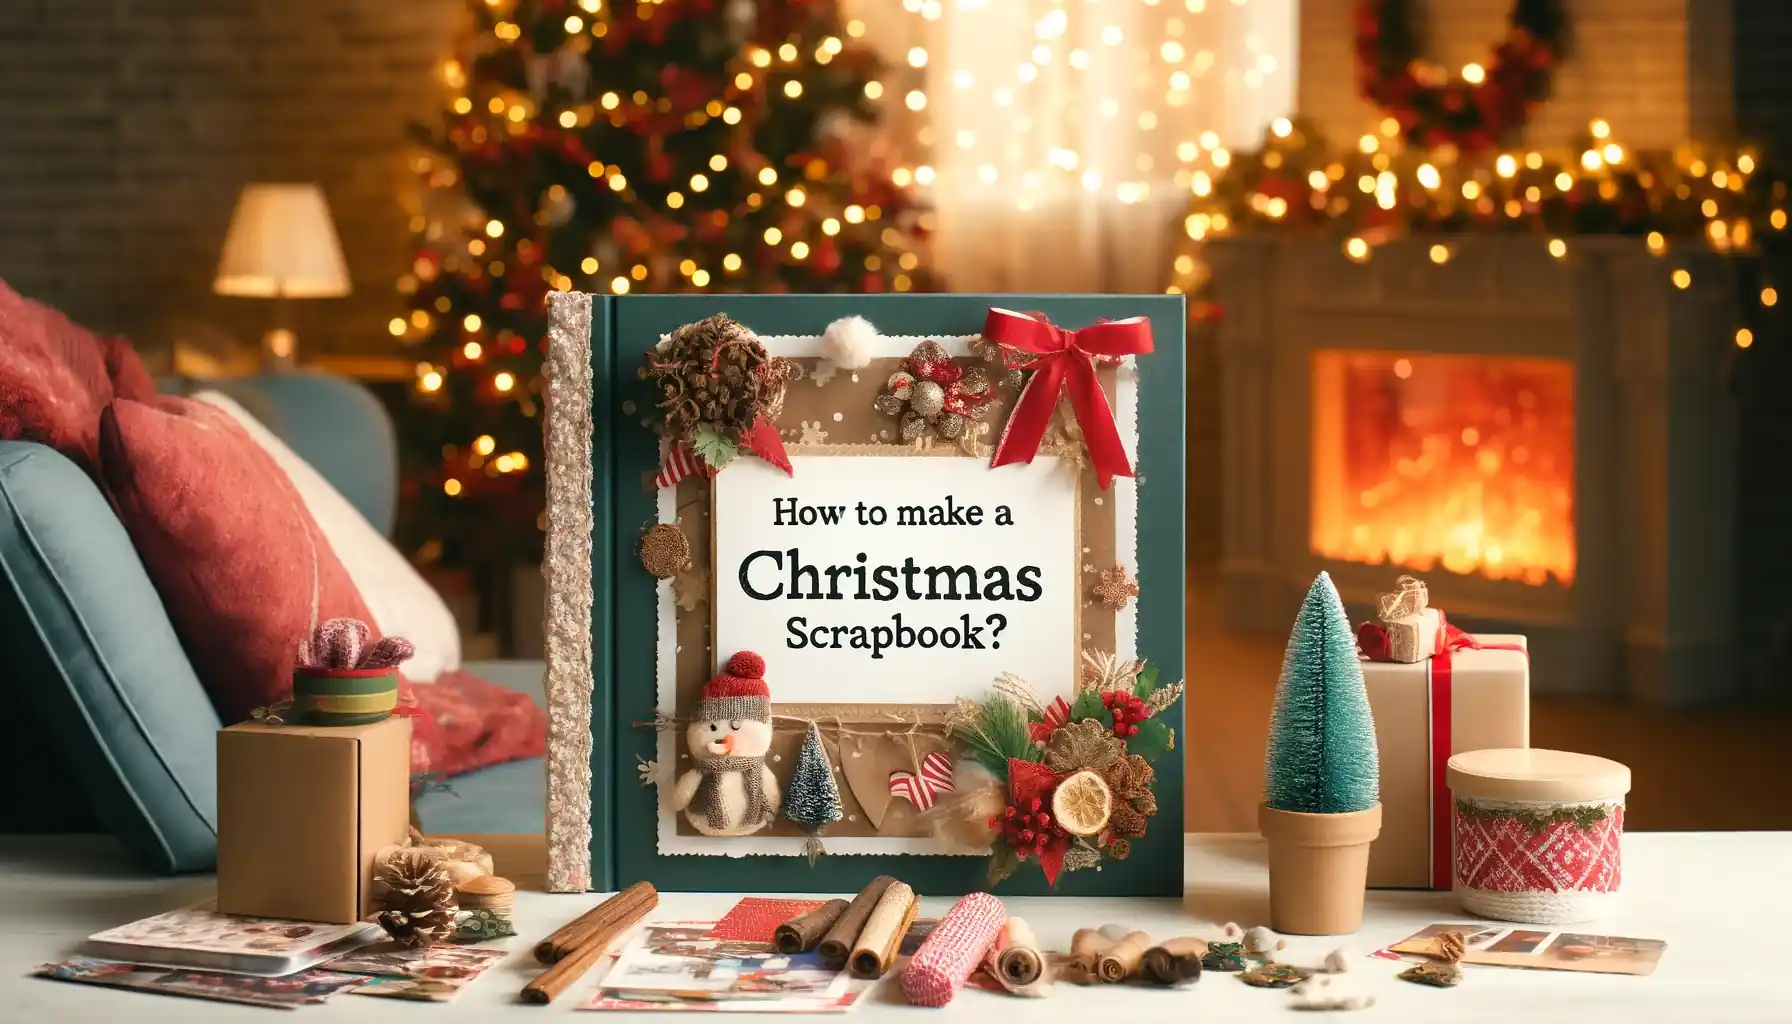 Make a Stunning Christmas Scrapbook A Step-by-Step Guide